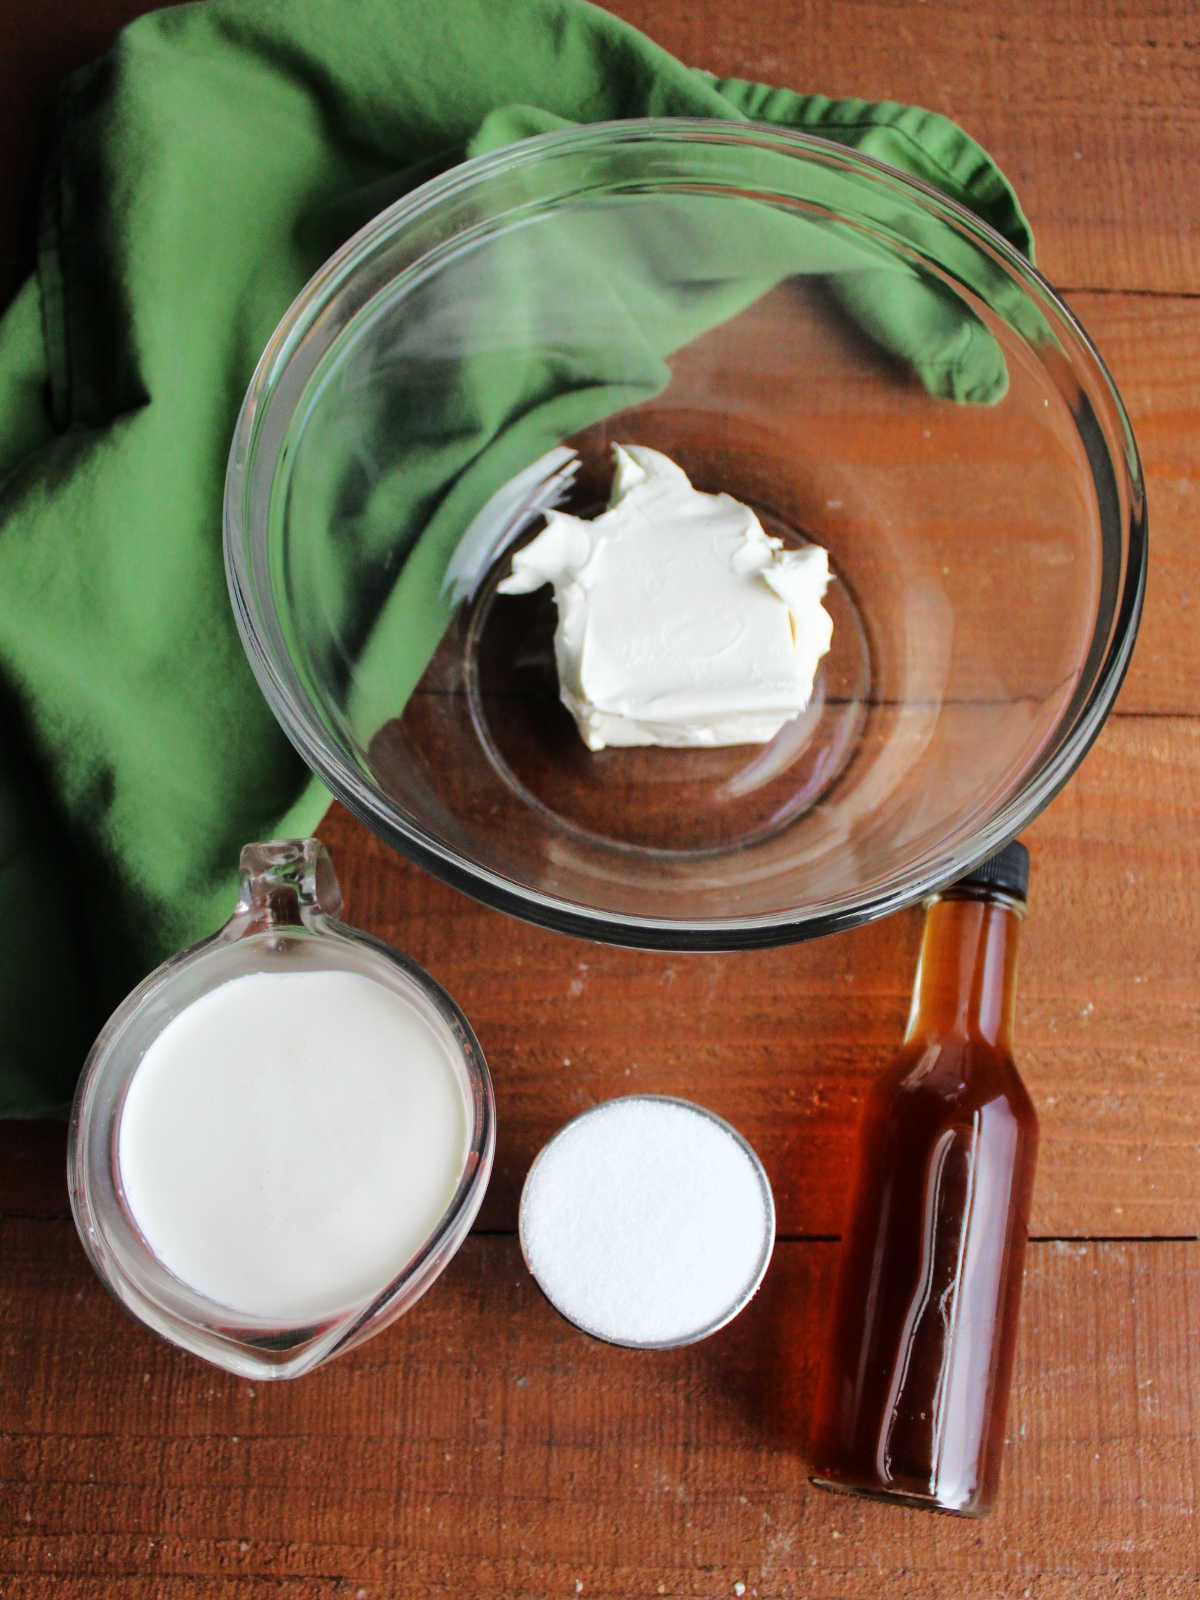 Cream cheese whipped cream ingredients including cream cheese, heavy whipping cream, sugar, and vanilla.